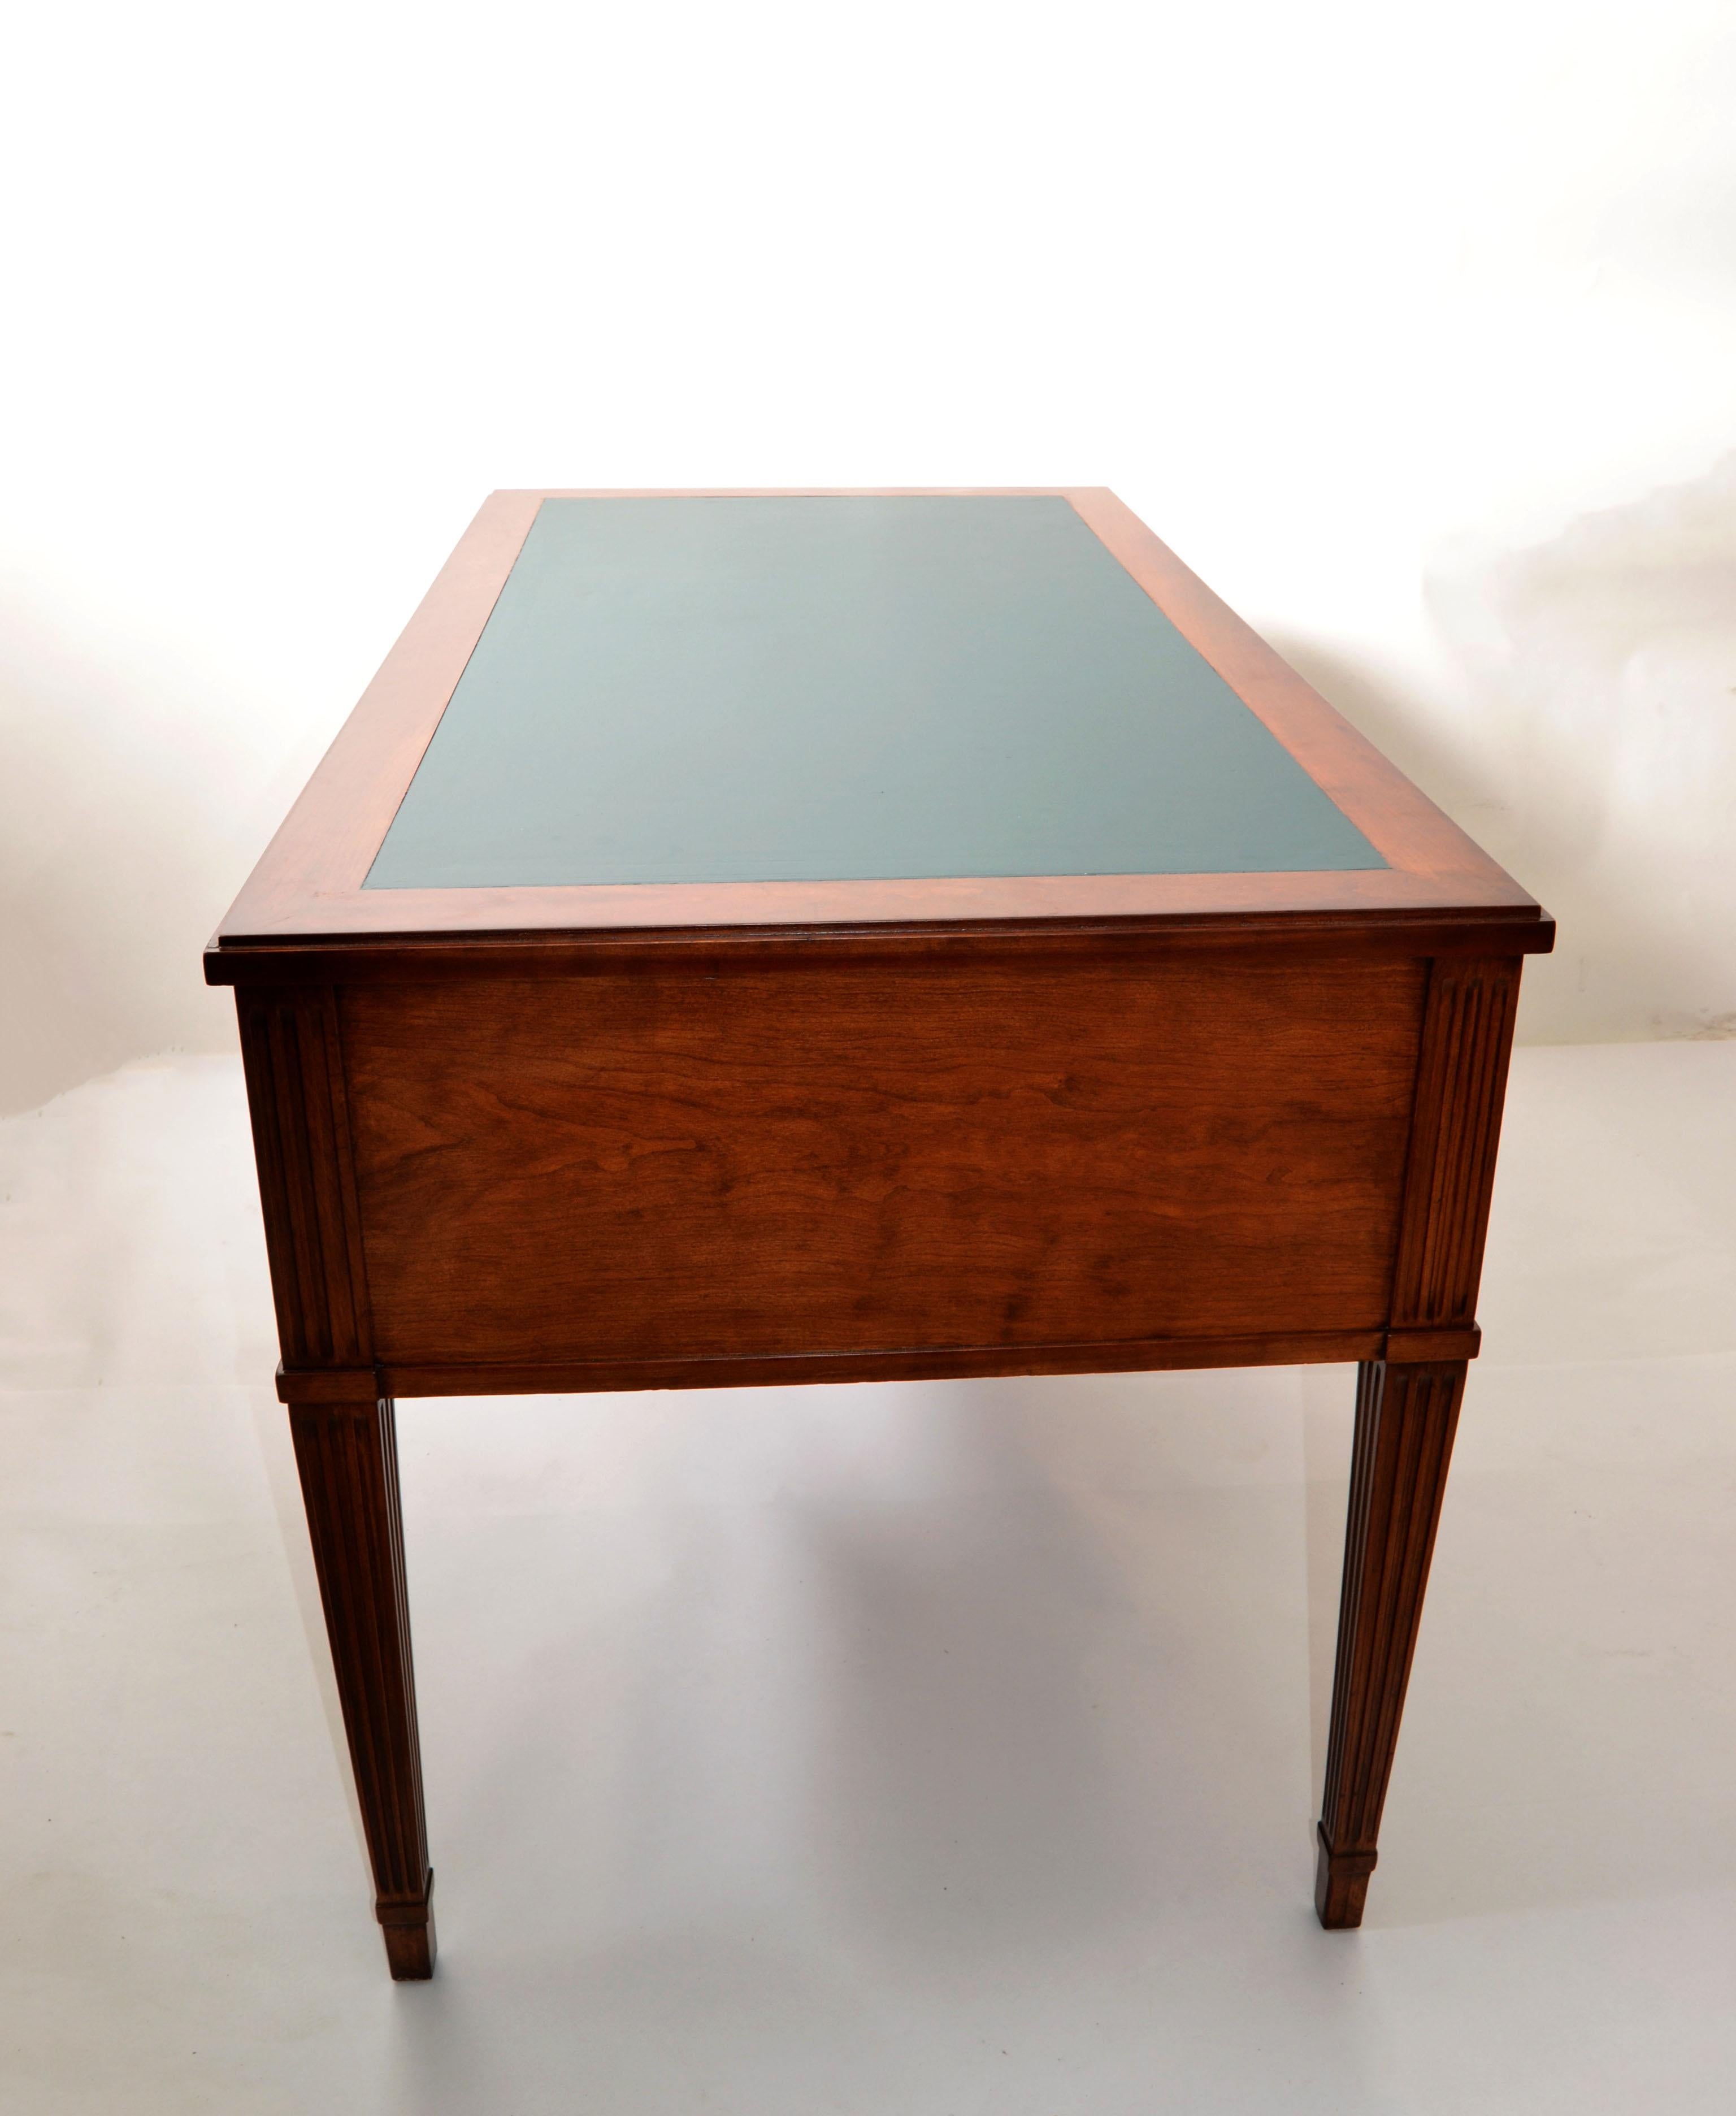 Mid-20th Century American Hollywood Regency Walnut & Green Leather Top, Writing Table Desk 1950